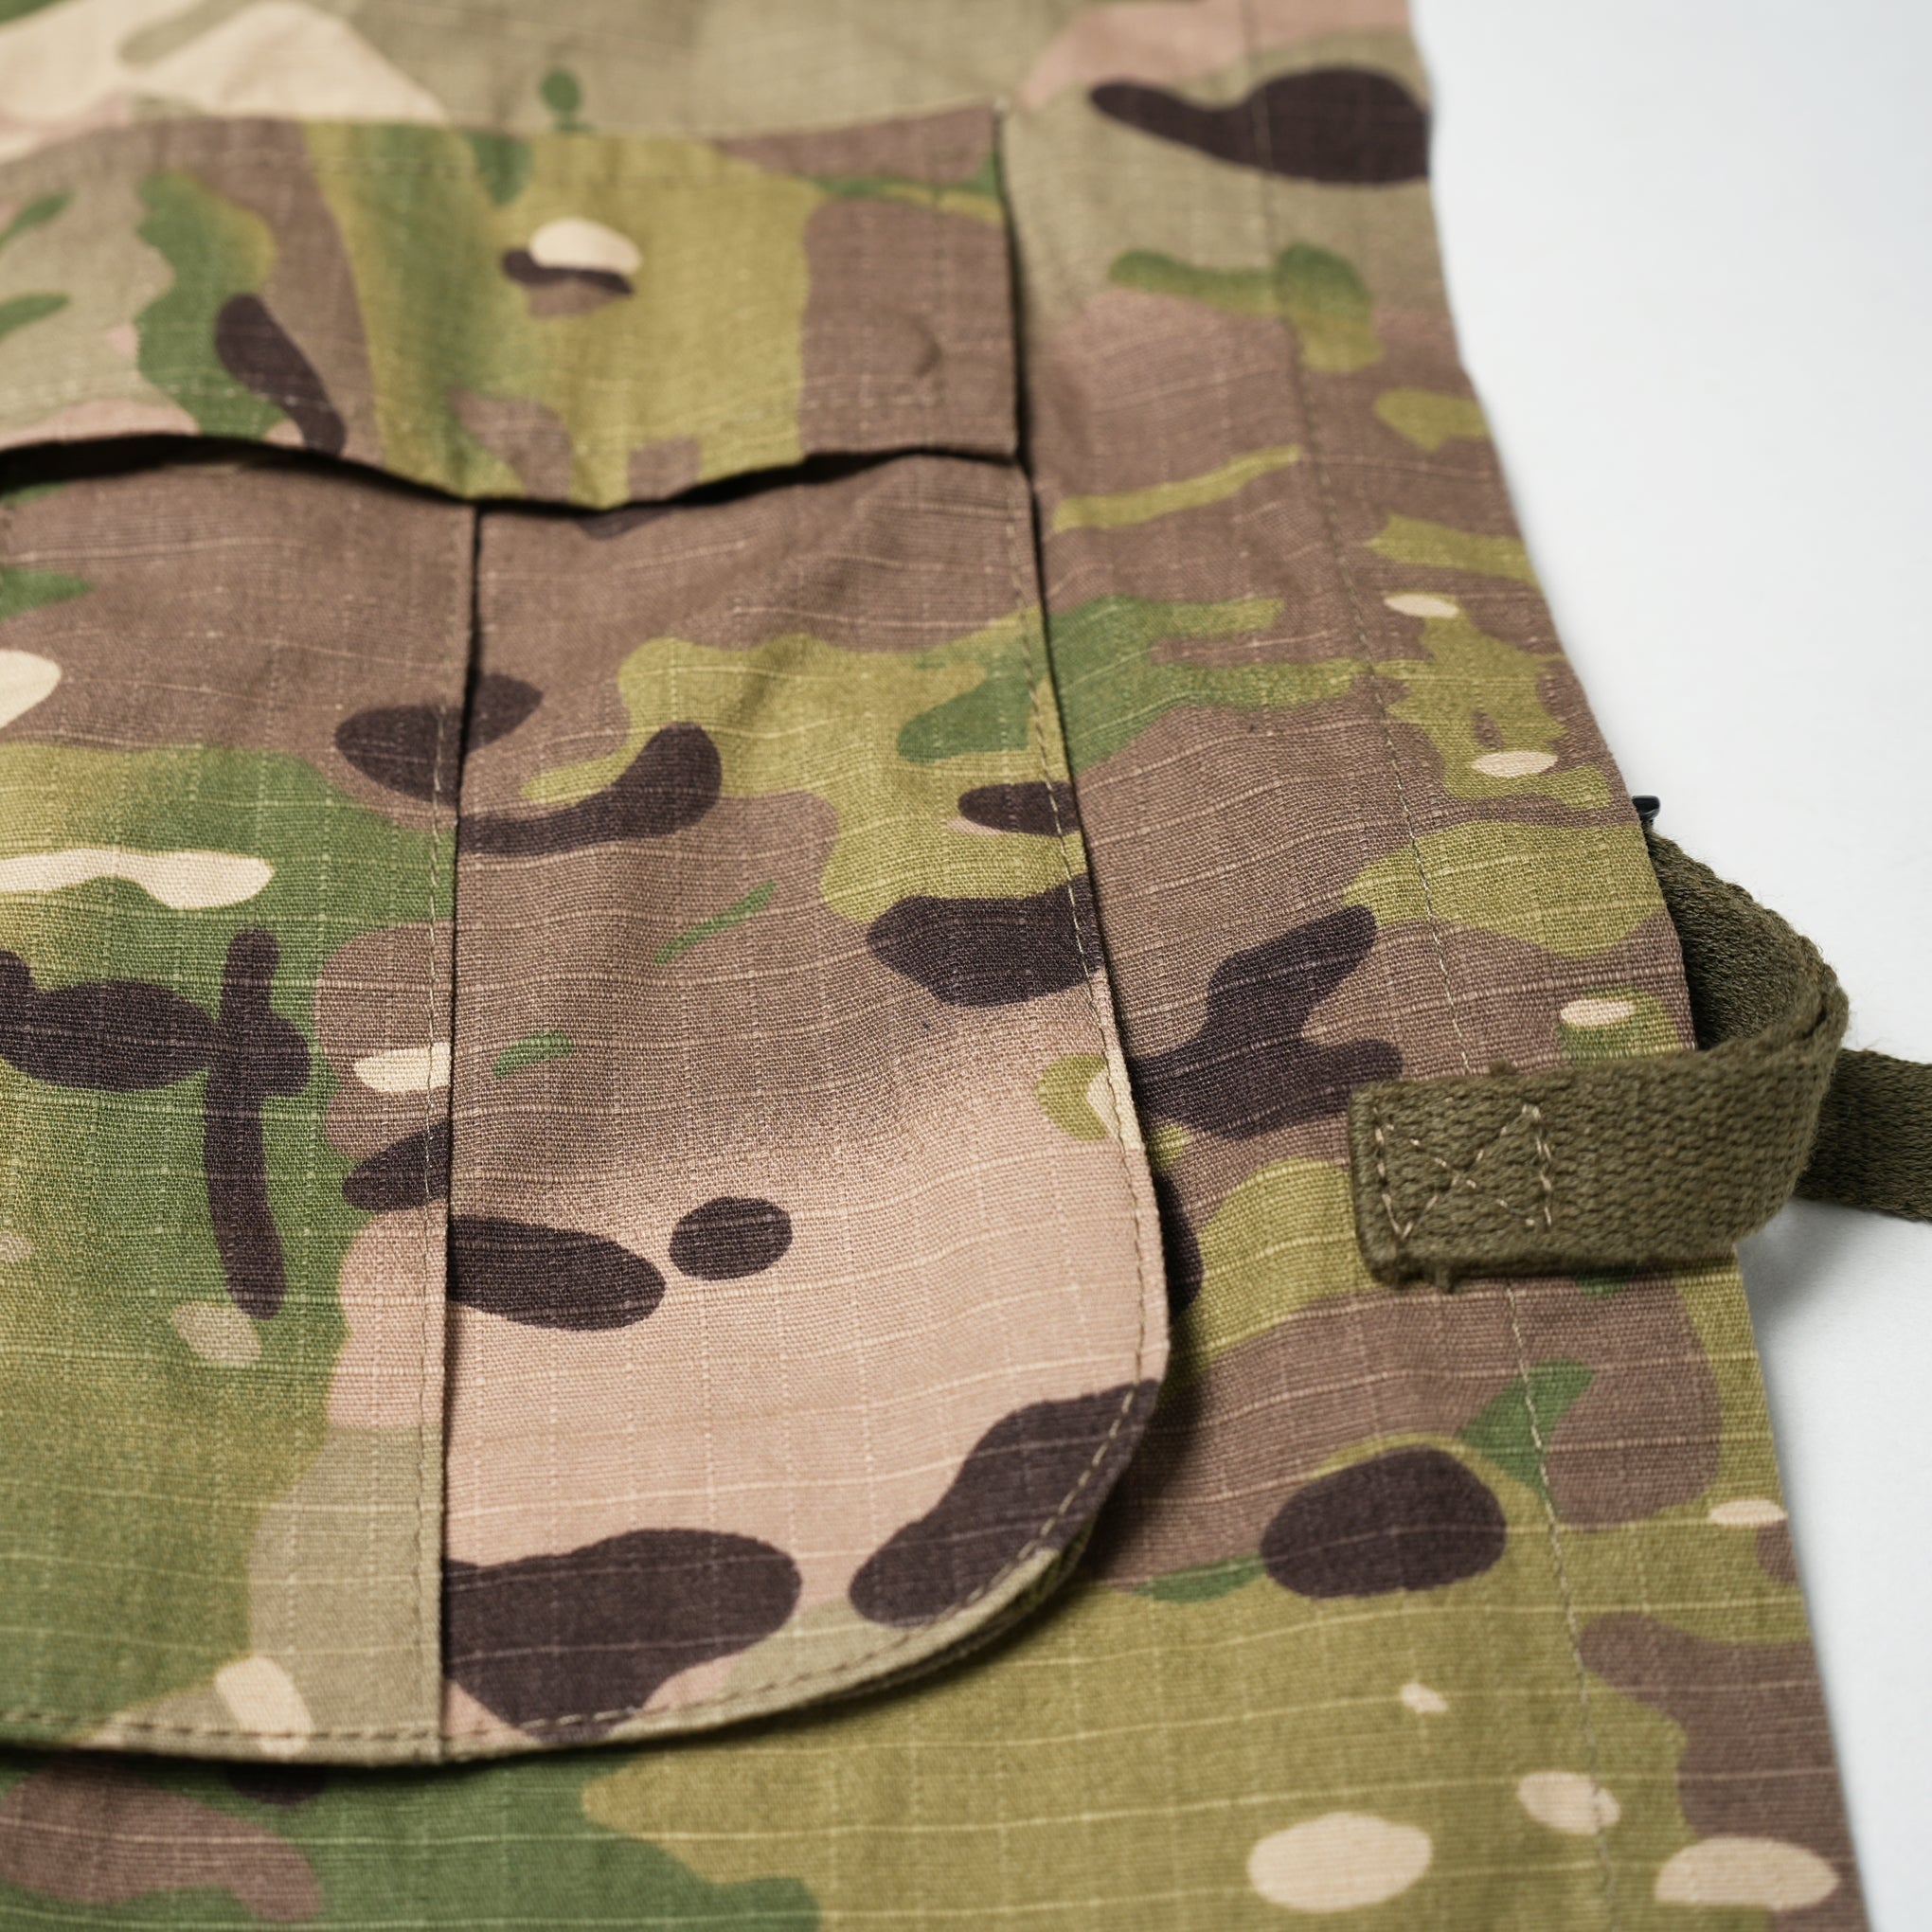 Name:SS23-SHOOTER VEST | Color:Camo | Size:L【WORKWARE】